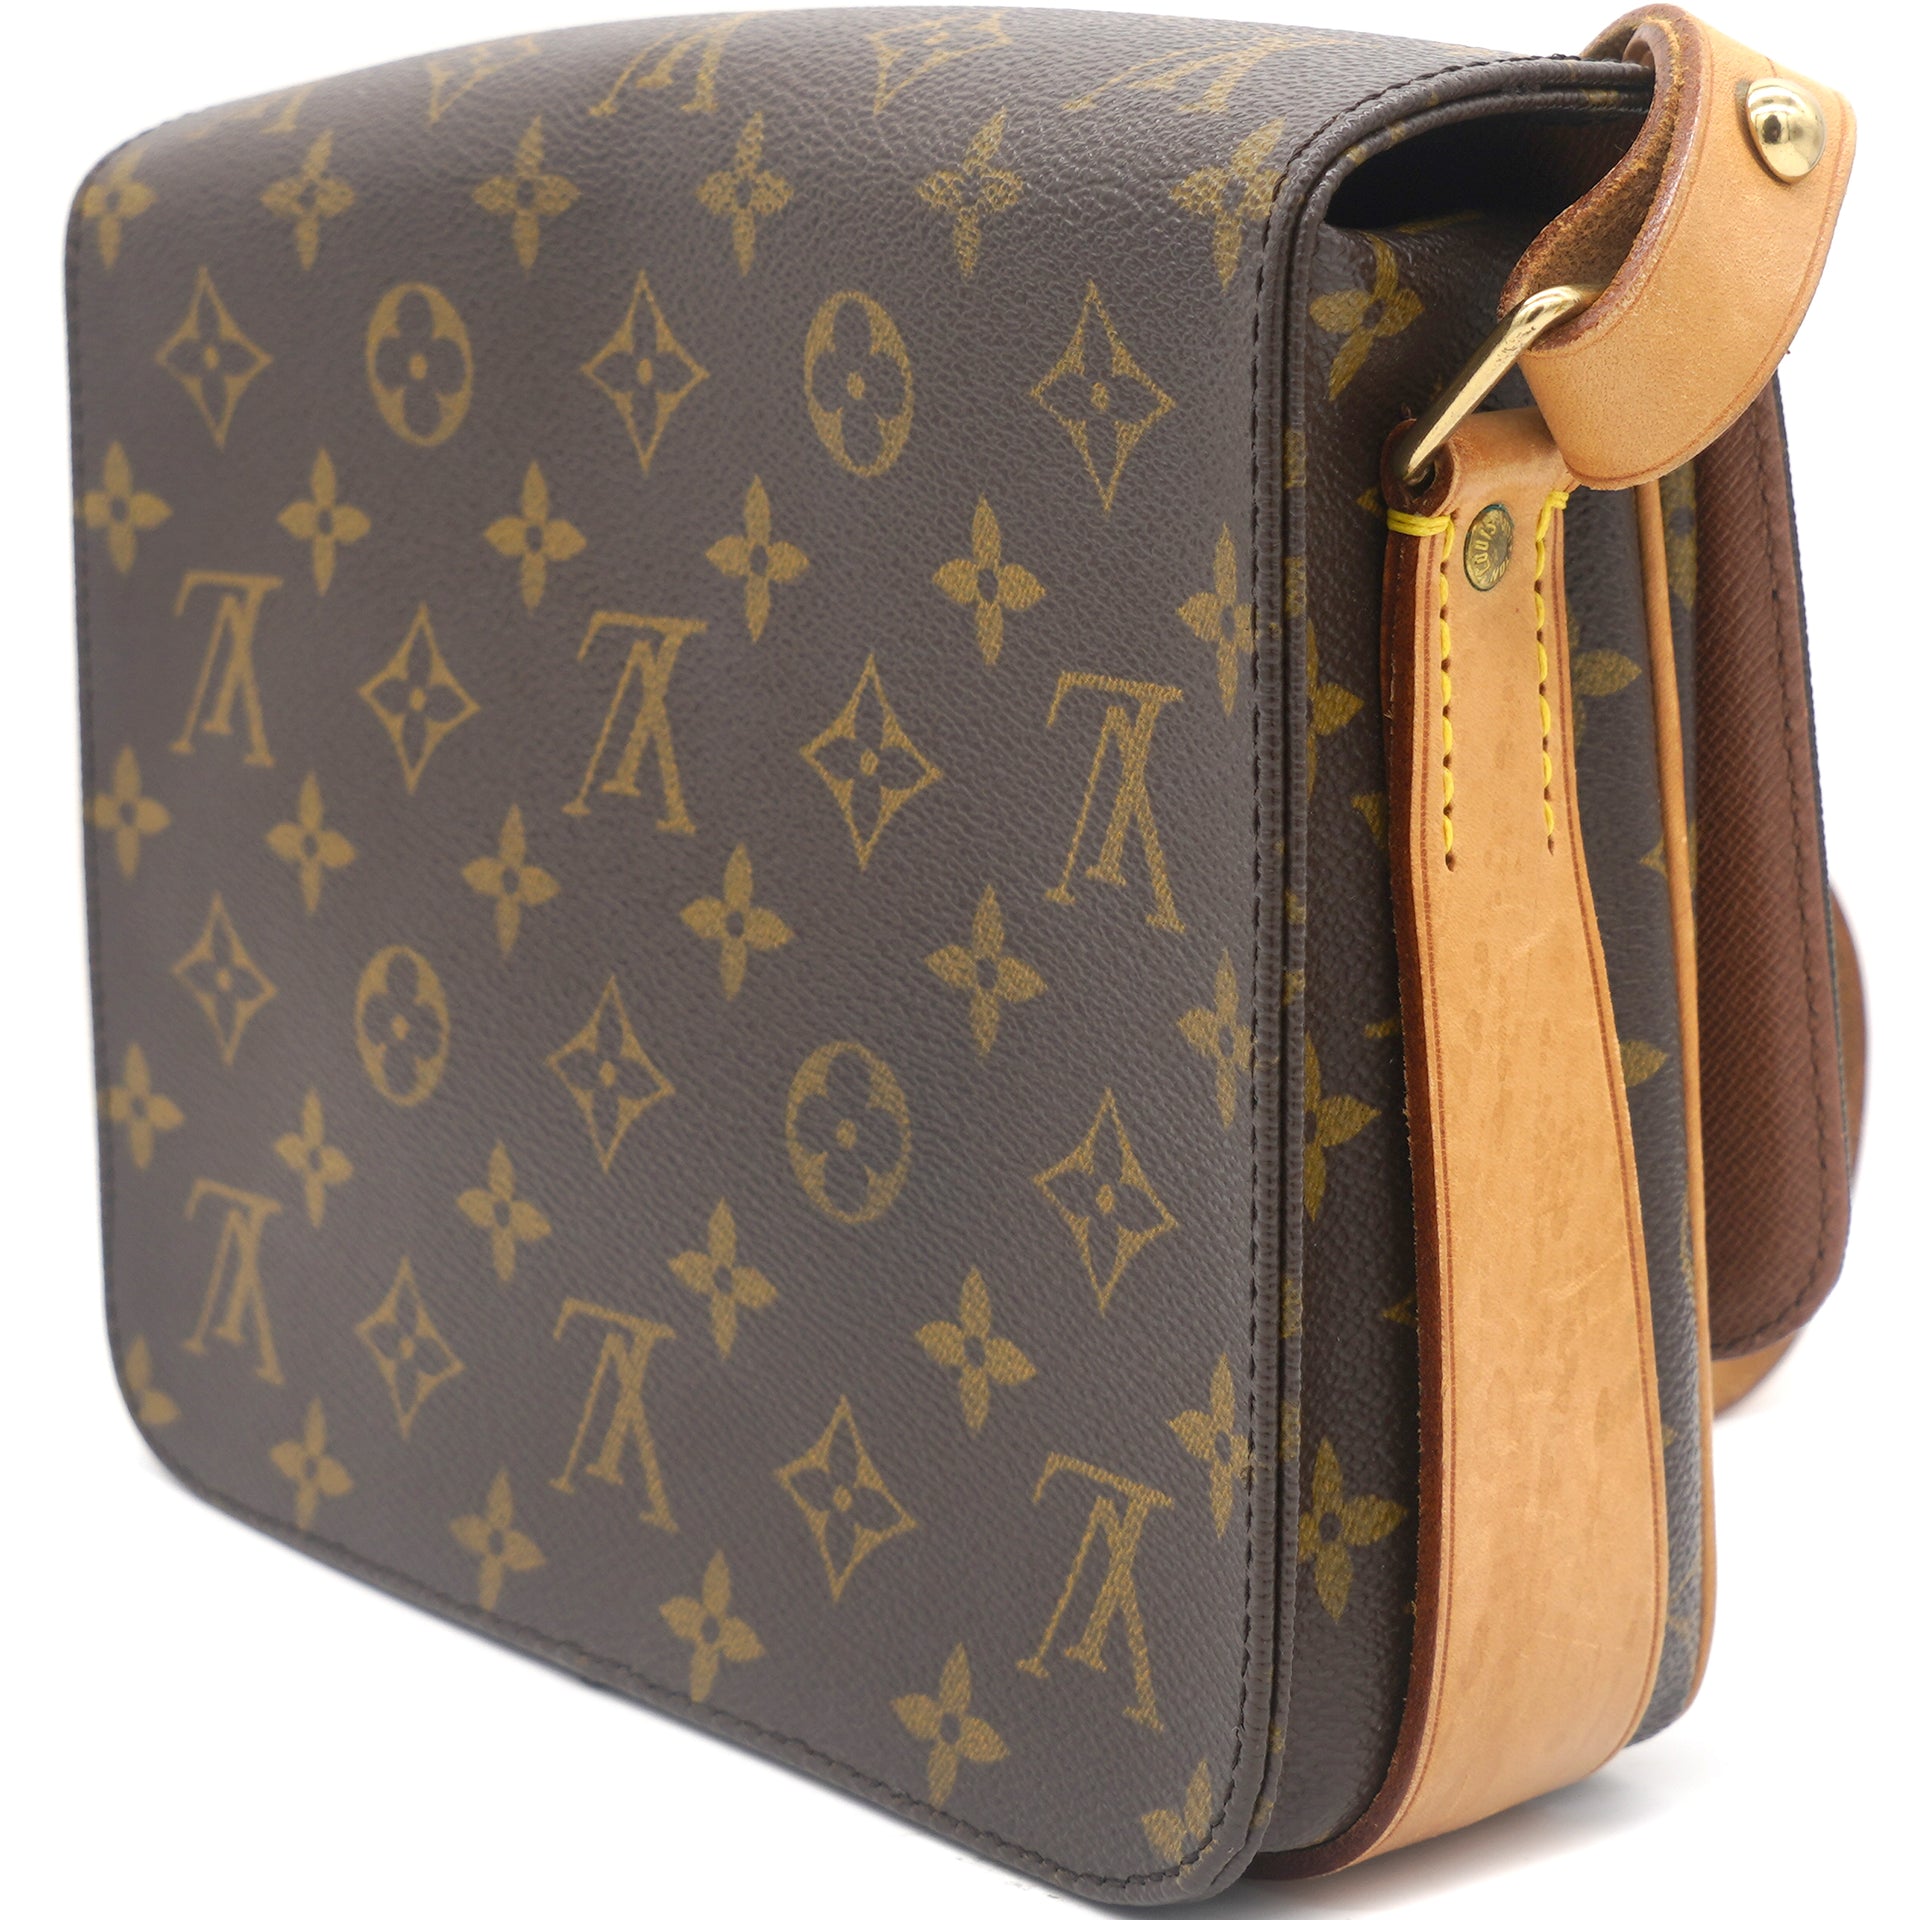 Vintage Louis Vuitton Trocadero Bag With Monogram From the  Etsy